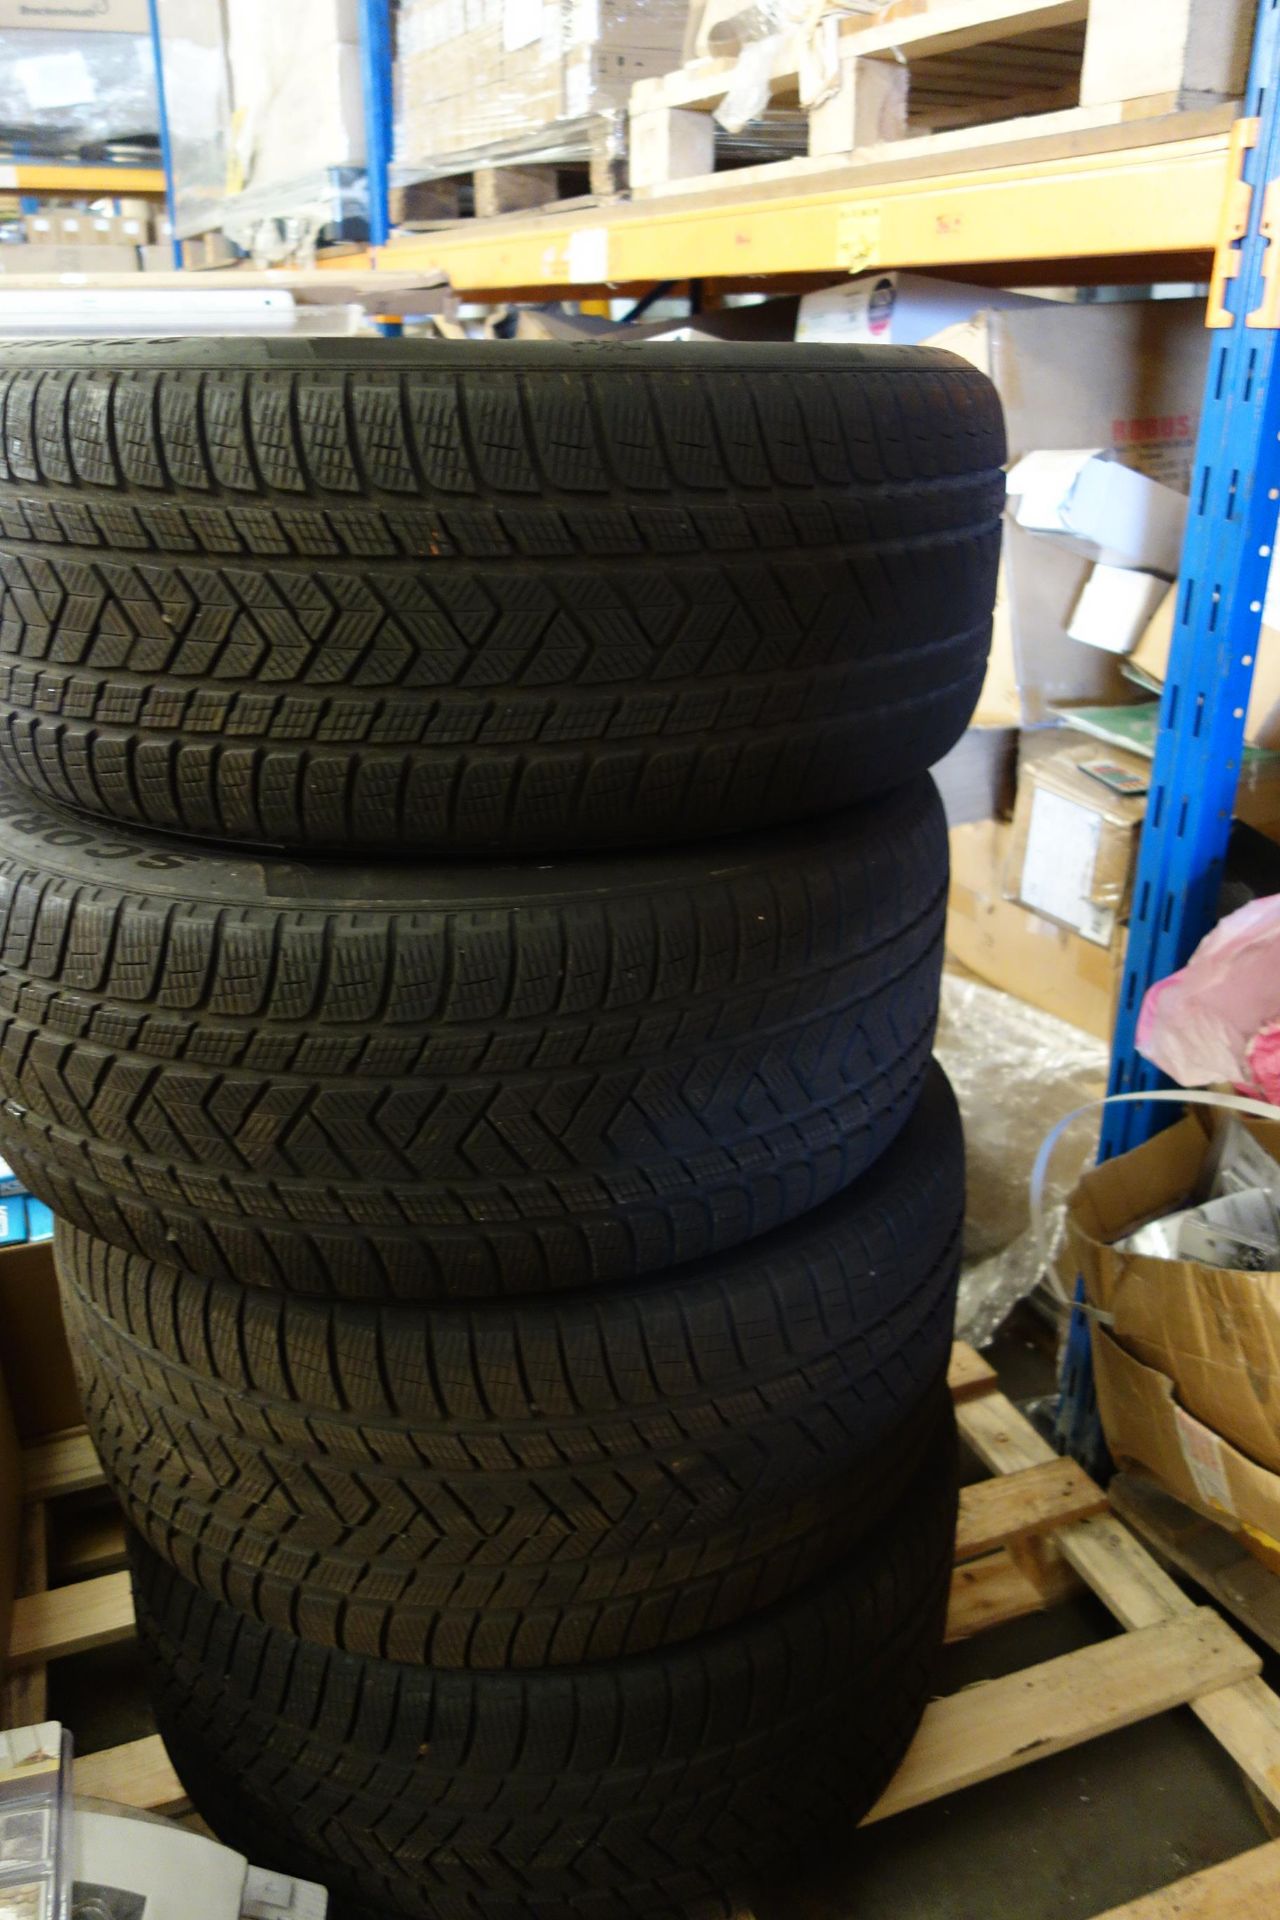 4 X PIPELLI Nearly New 7MM Depth 21INR 275/45 R21 107V Snow Tyres 024195 52wr1 ECOIMPACT In Tip